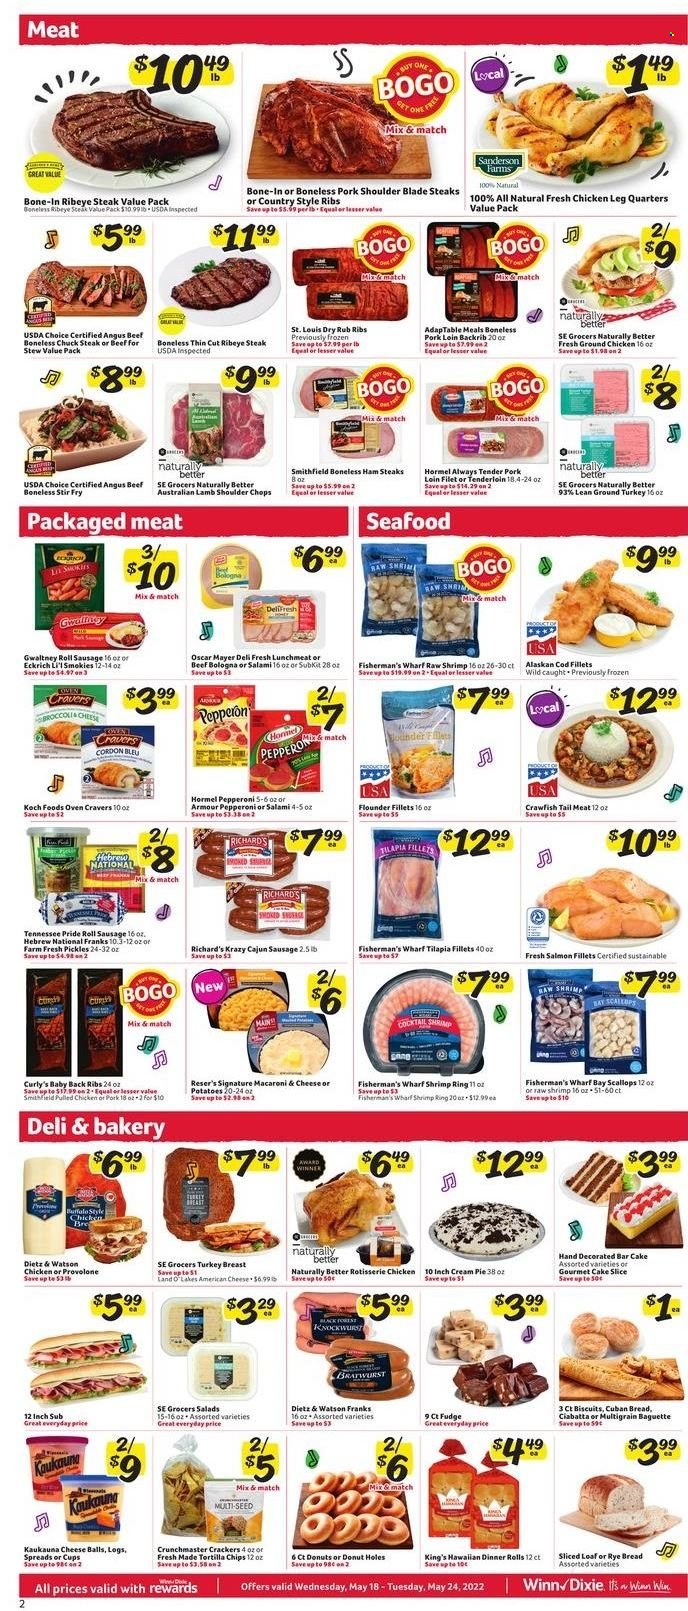 thumbnail - Winn Dixie Flyer - 05/18/2022 - 05/24/2022 - Sales products - baguette, bread, ciabatta, cake, pie, dinner rolls, donut holes, cream pie, potatoes, cod, flounder, salmon, salmon fillet, scallops, tilapia, seafood, shrimps, chicken roast, pulled chicken, Hormel, salami, ham, bologna sausage, Oscar Mayer, Dietz & Watson, bratwurst, sausage, pepperoni, lunch meat, ham steaks, american cheese, Provolone, crawfish, fudge, crackers, biscuit, tortilla chips, pickles, ground chicken, ground turkey, turkey breast, chicken legs, beef meat, beef steak, steak, bone-in ribeye, chuck steak, ribeye steak, pork loin, pork meat, pork ribs, pork shoulder, pork back ribs, country style ribs, lamb meat, lamb shoulder, cup. Page 2.